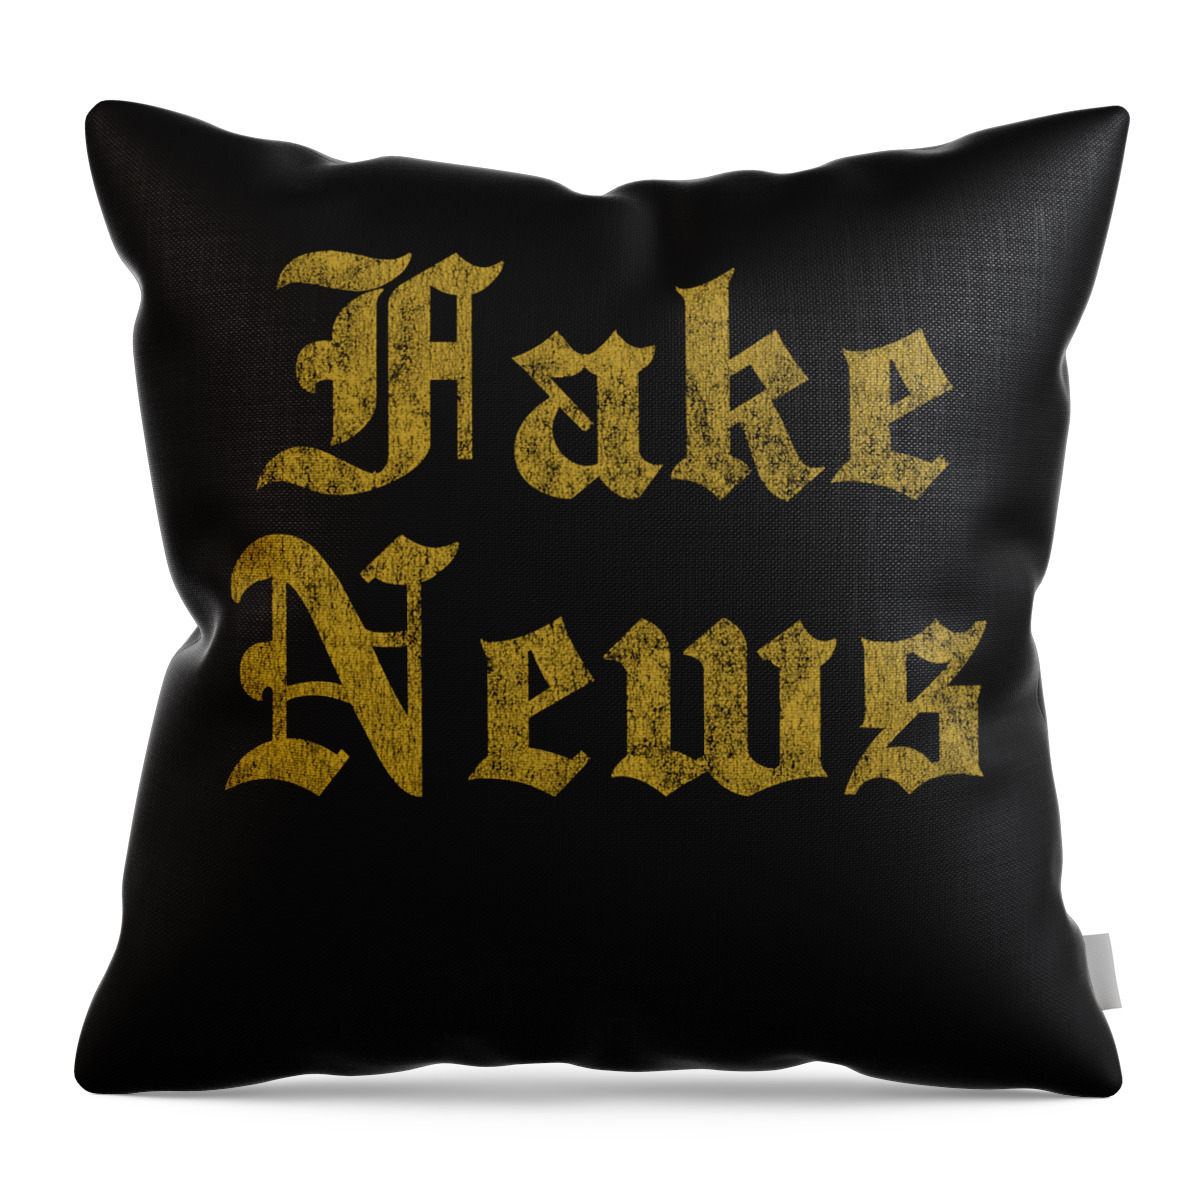 Cool Throw Pillow featuring the digital art Retro Fake News by Flippin Sweet Gear